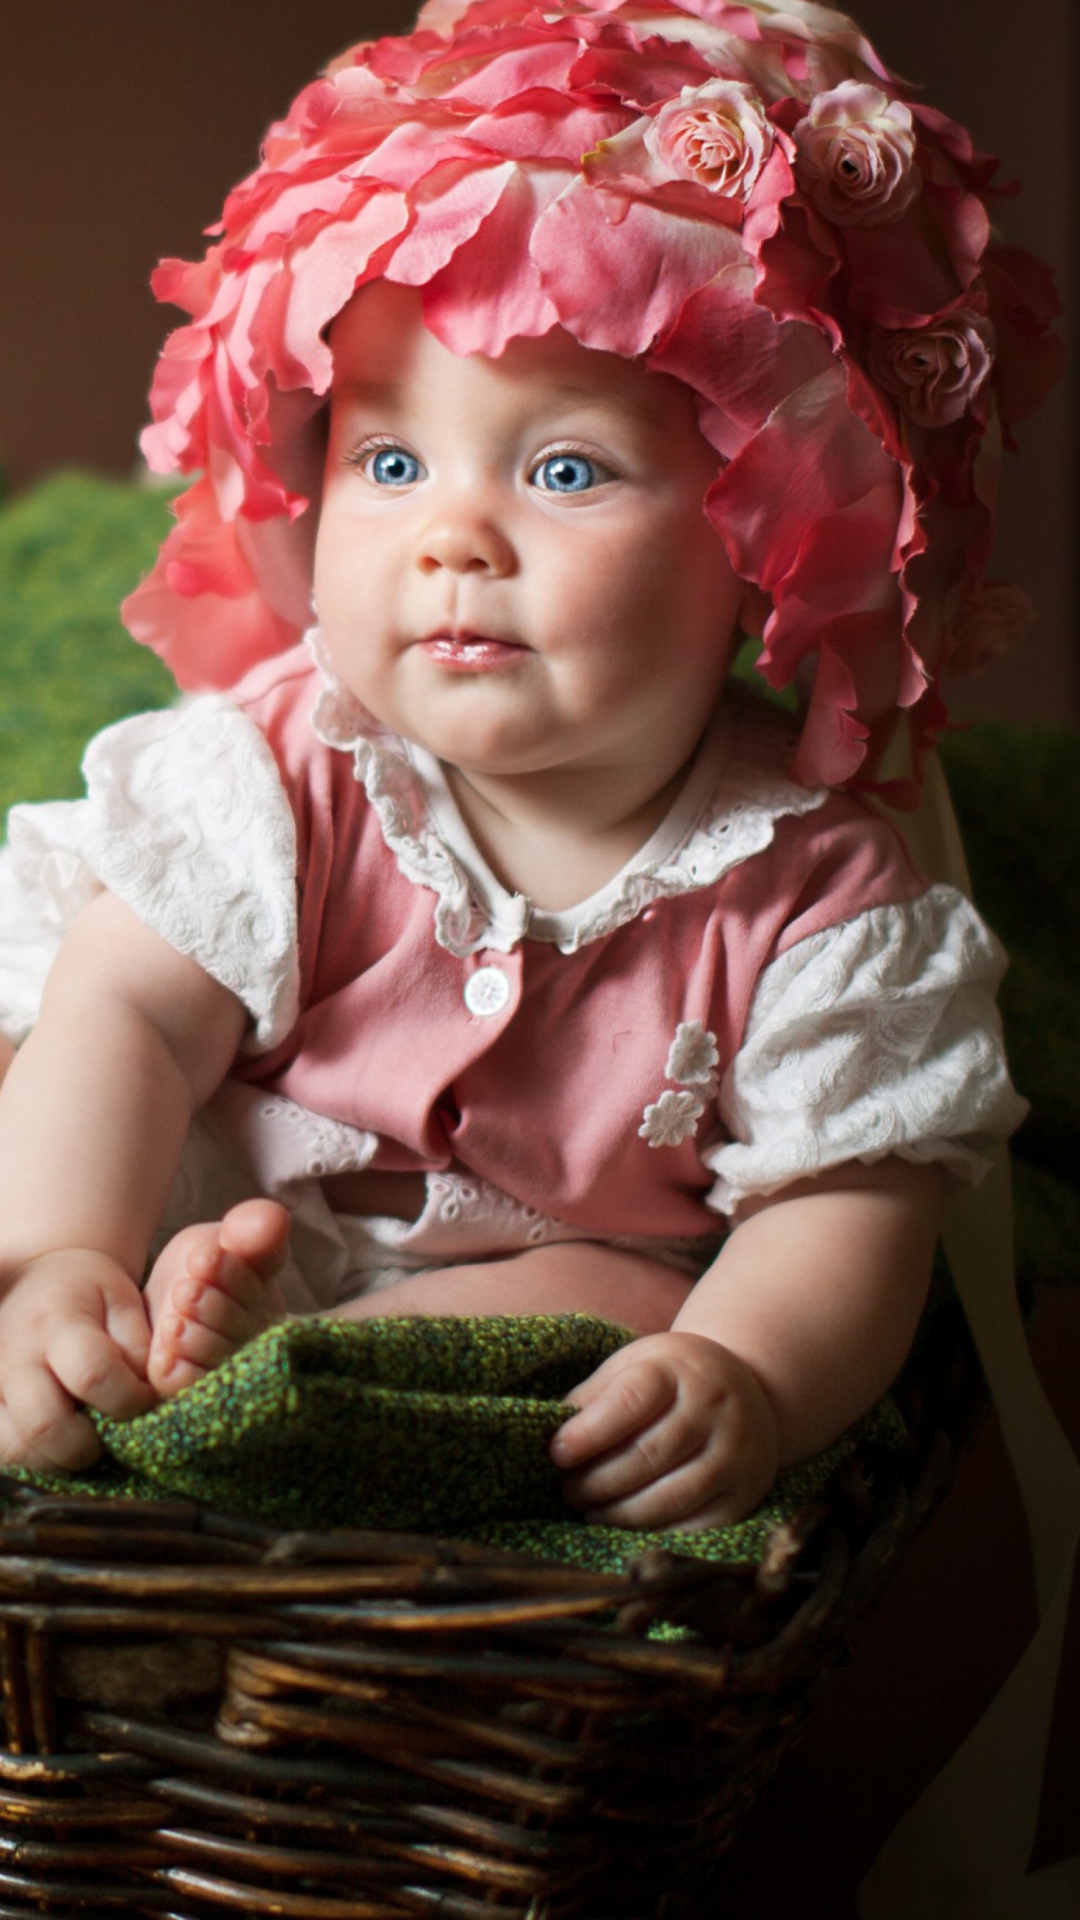 Cute Baby With Blue Eyes And Roses screenshot #1 1080x1920